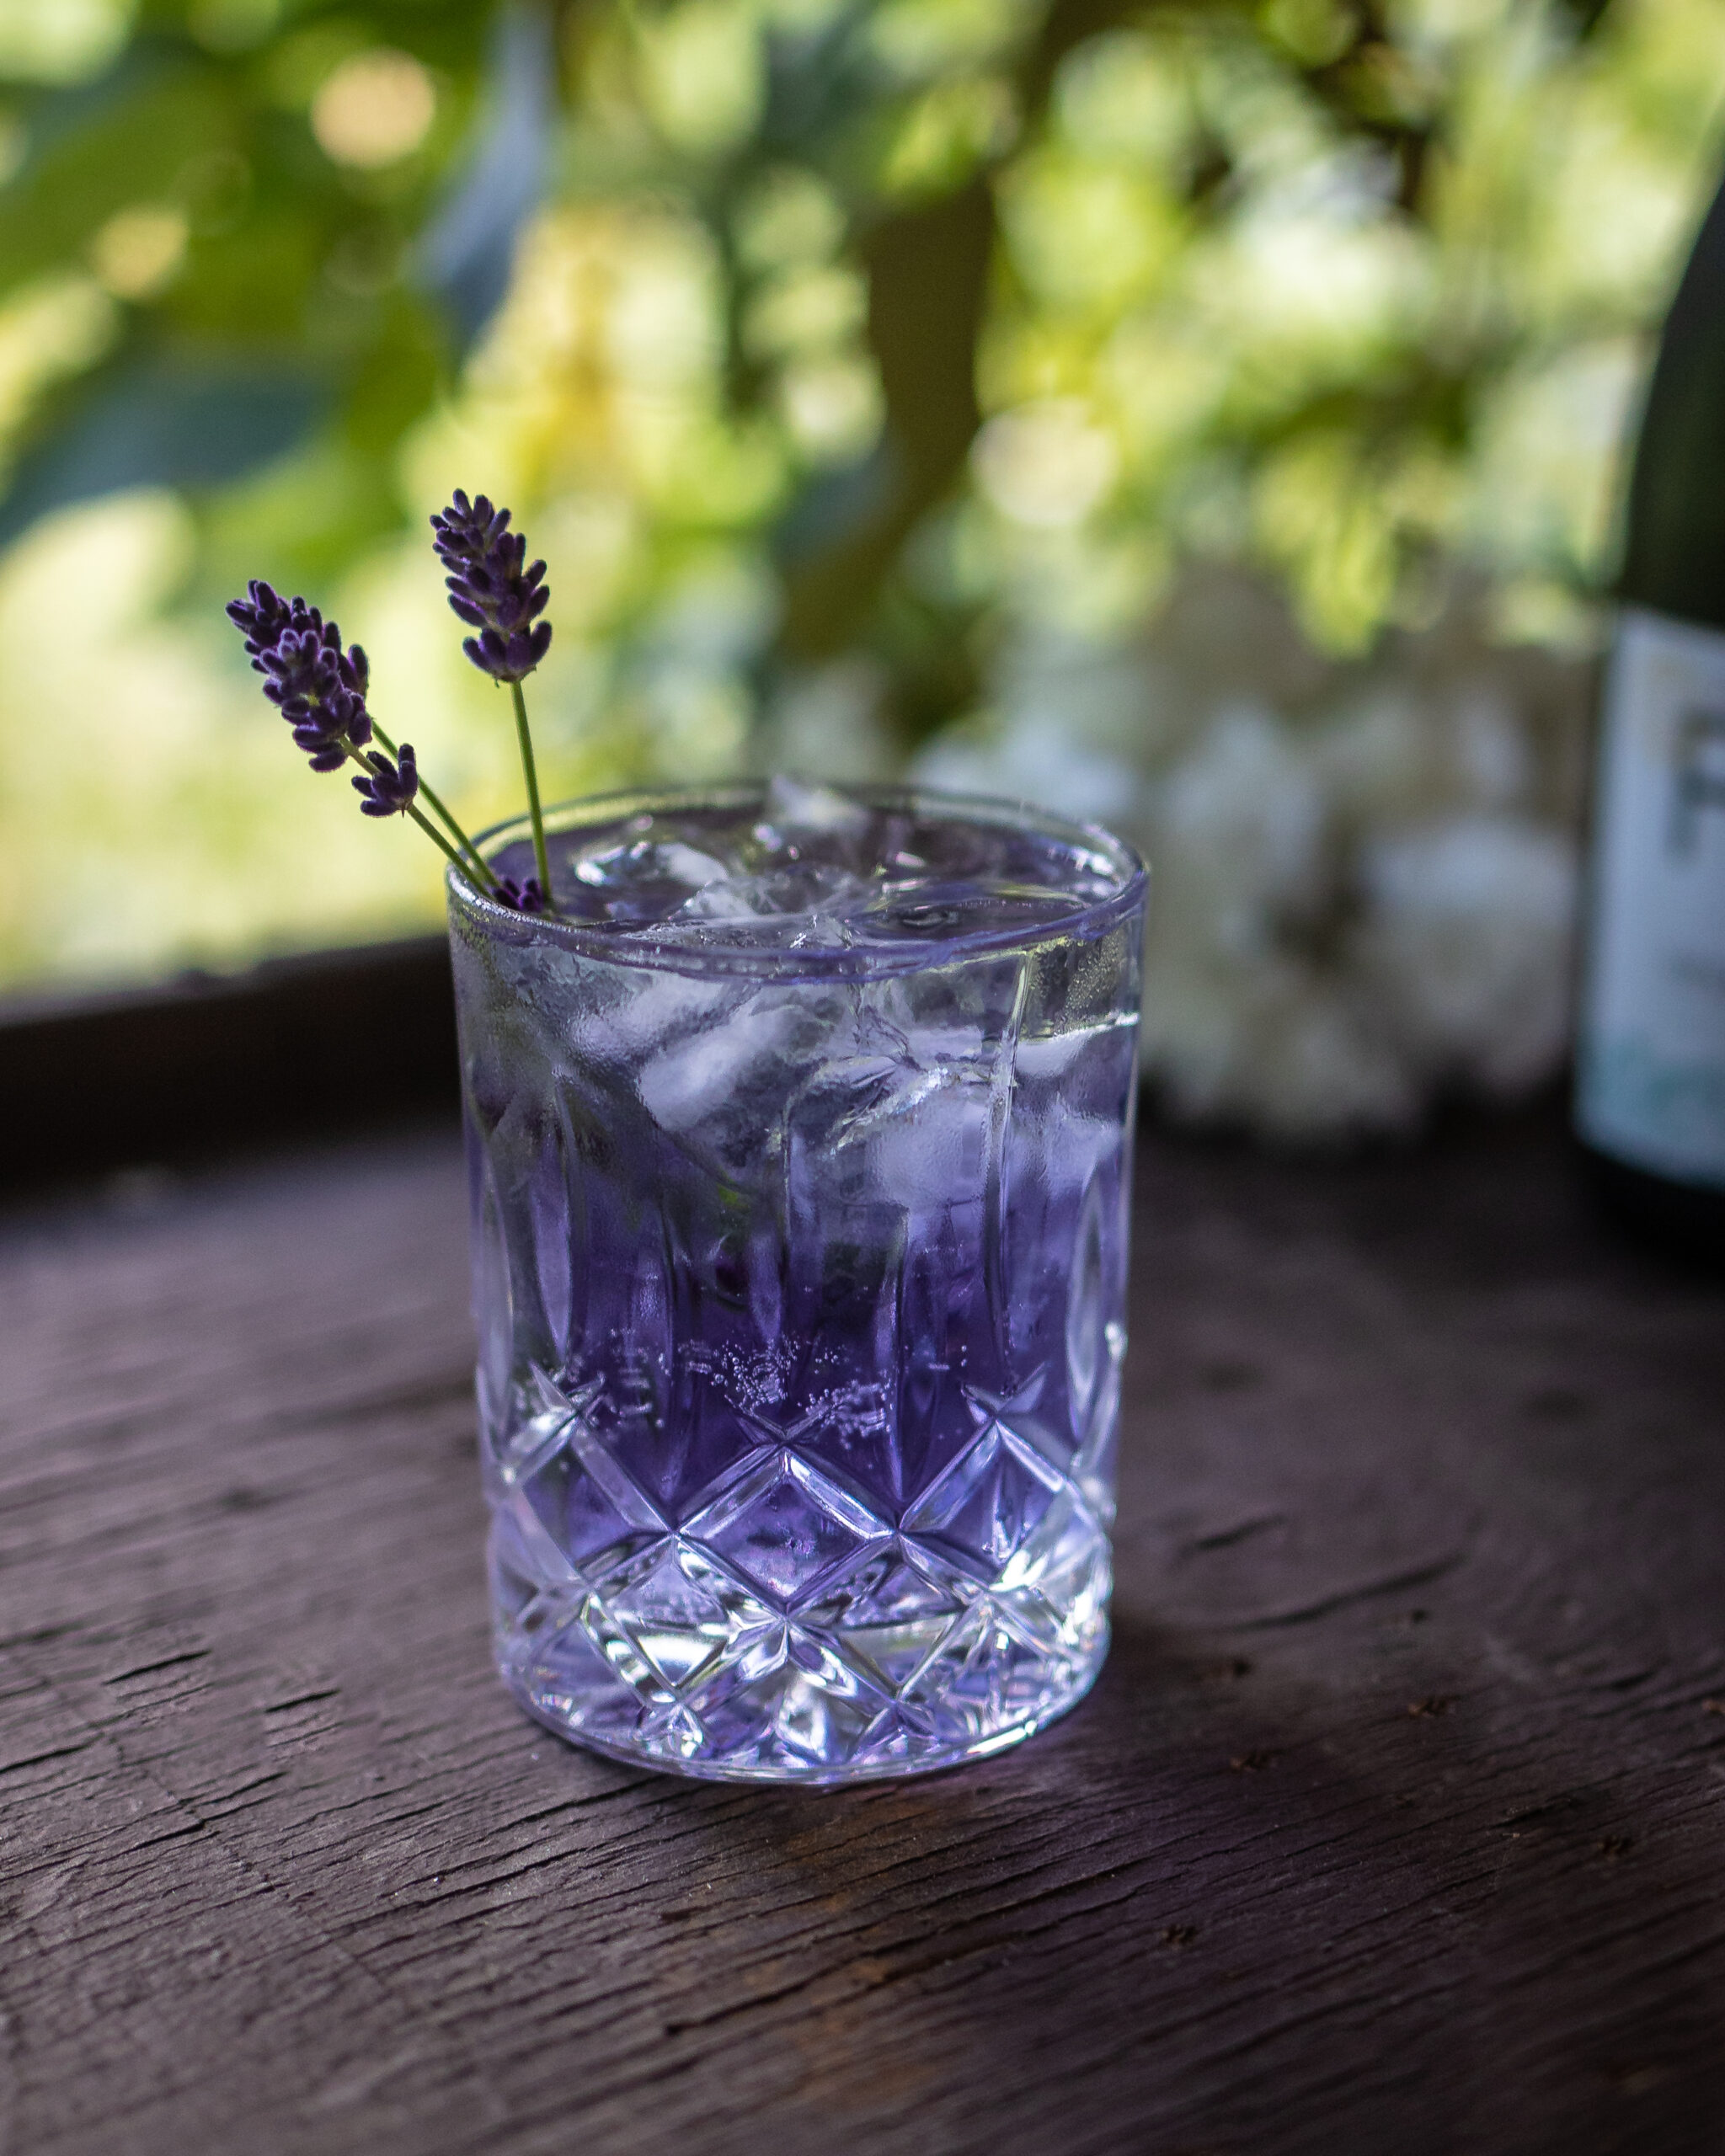 FRE Lavender & Butterfly Pea Flower Spritz, fre wines, fre, free, alcohol removed, alcohol removed white wine, alcohol free white wine, mocktails, wine cocktails, spritz, alcohol free drink